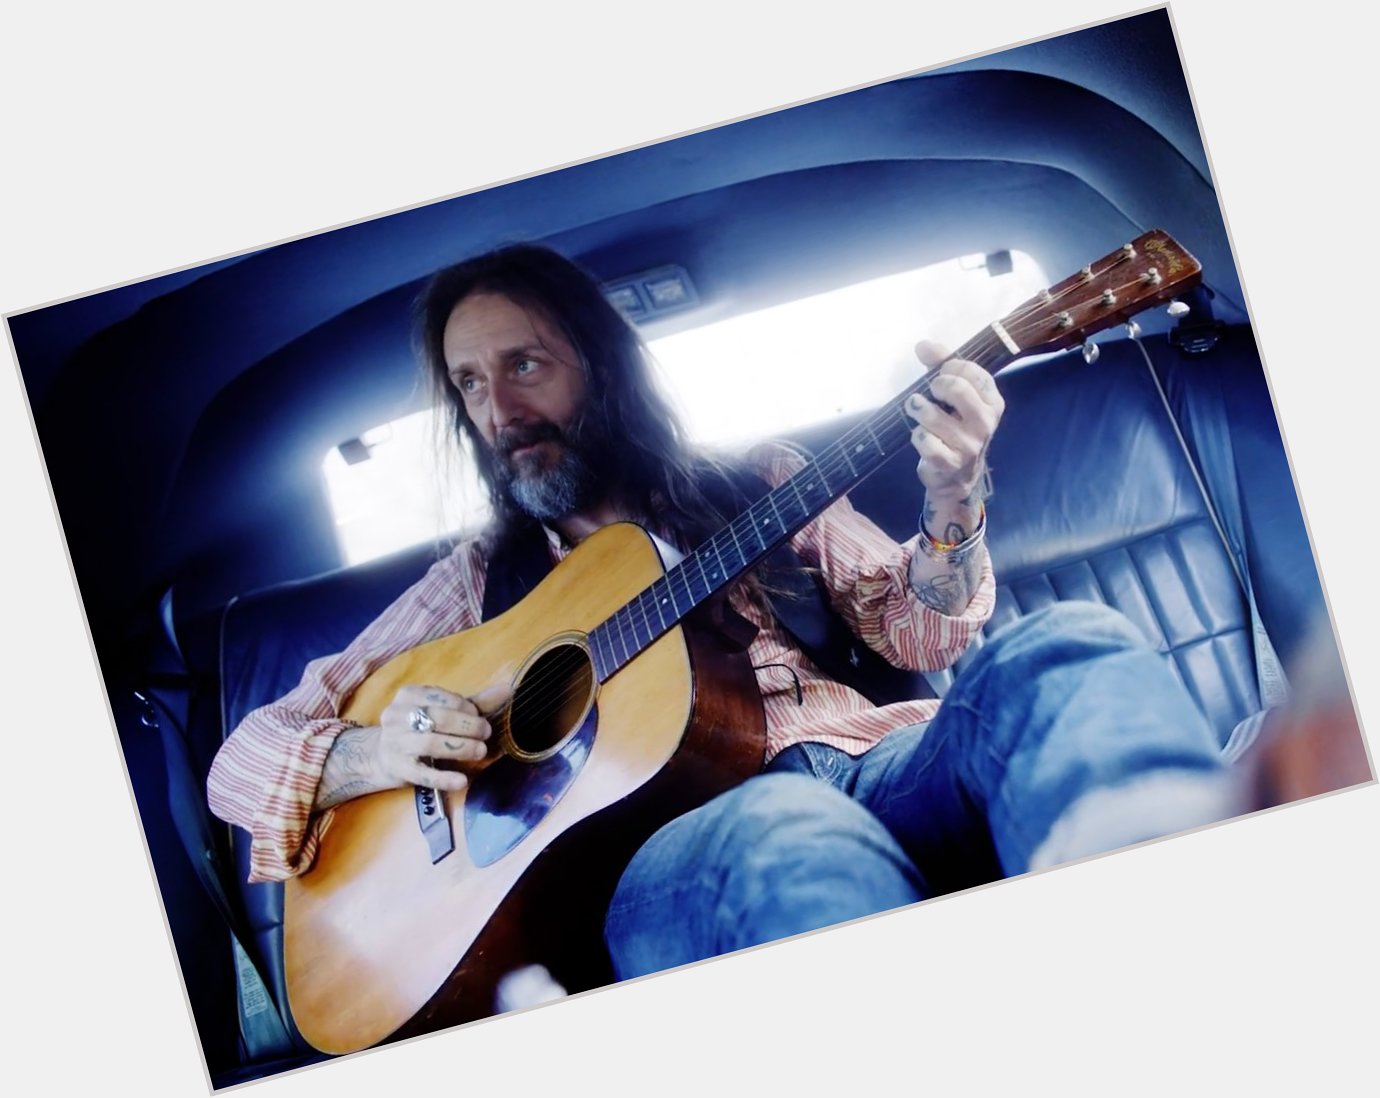 Happy Birthday to Chris Robinson! The Black Crowes will kick off their tour on June 17th. Got your tix? 